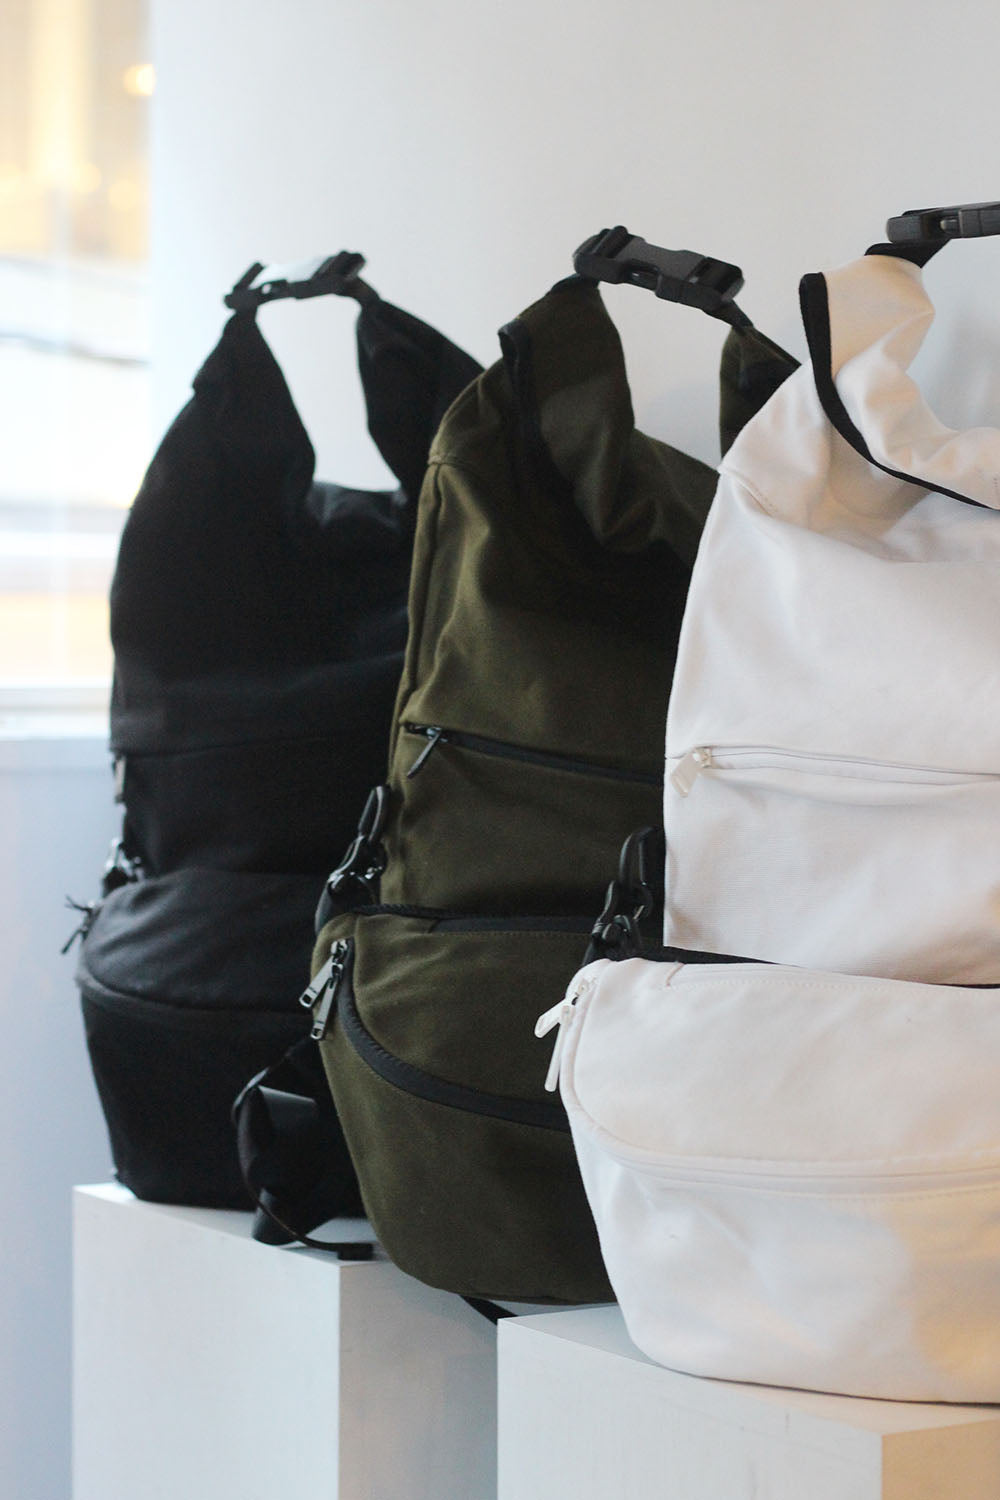 JUN MIKAMI × WILD THINGS "backpack" (black/ forest green/ white )